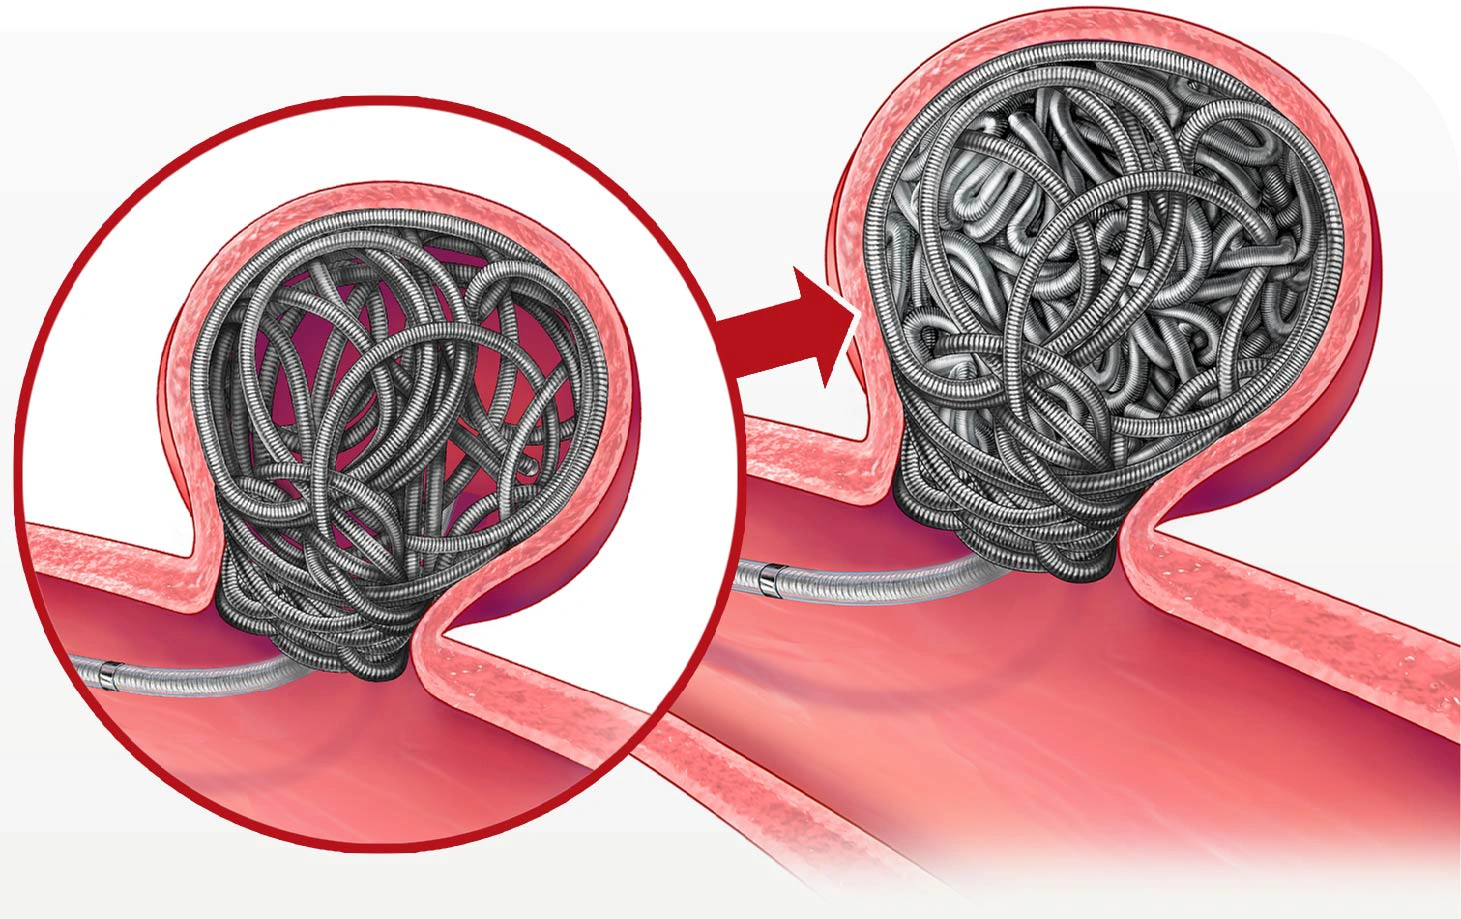 Illustration Ruby Coil System coiling and packing and aneurysm in a vessel within the body